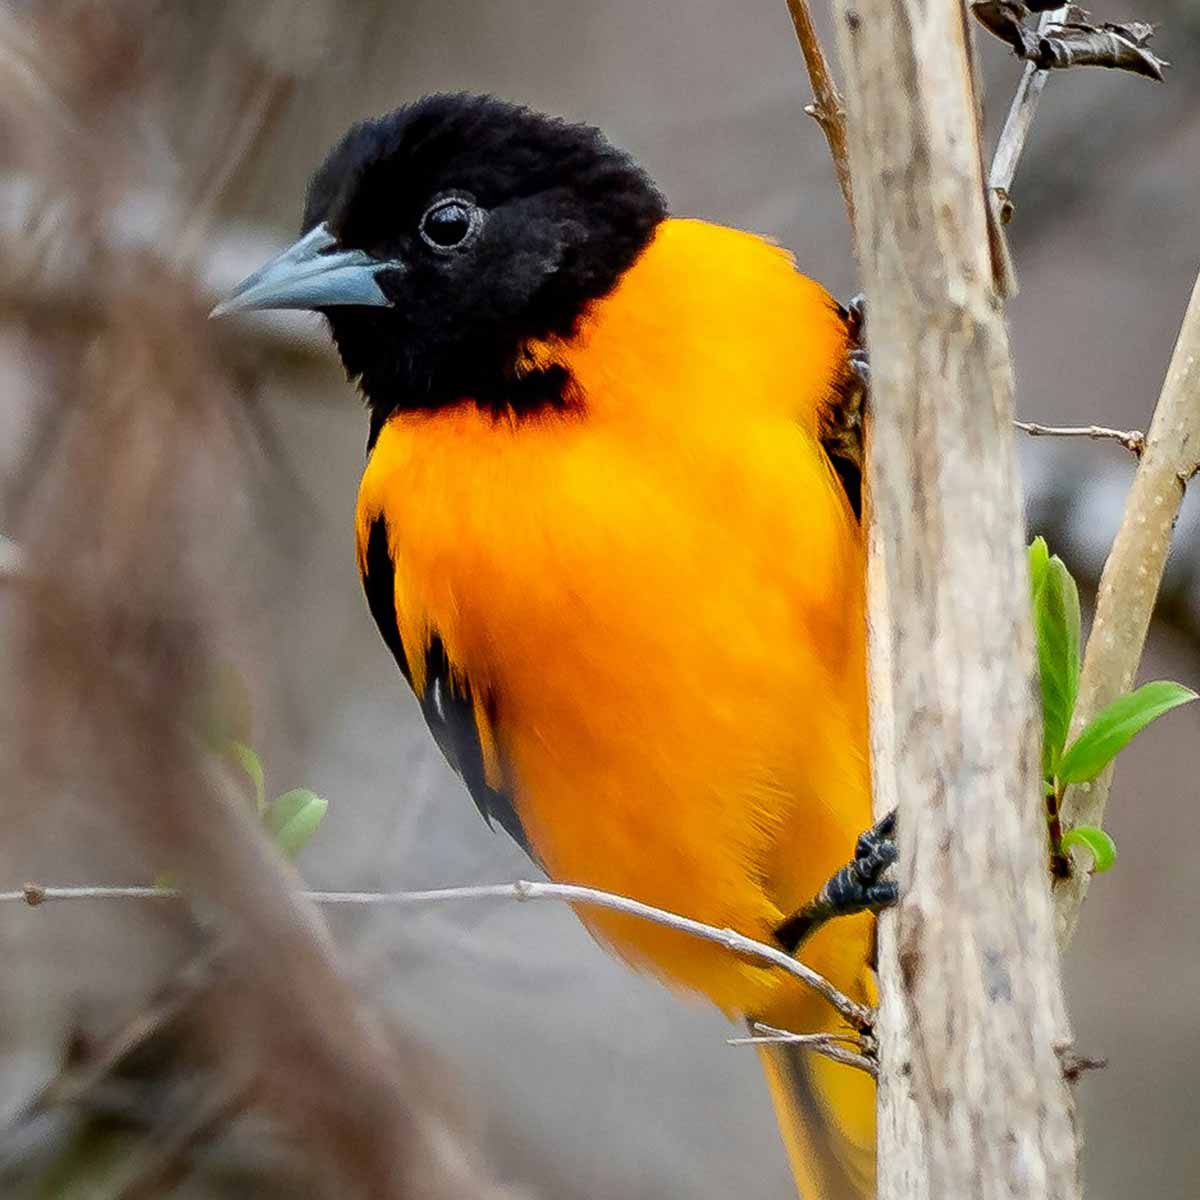 A Baltimore oriole peeking out from the side of a tree branch, as if it has sensed something in its environment. The oriole's distinctive black head, bright orange body bars are clearly visible, allowing the viewer to easily identify the species. The bird's head is turned slightly to the side, giving it an alert, inquisitive expression. This dynamic, candid pose captures the Baltimore oriole's natural curiosity and adaptability, as it navigates its woodland habitat. The blurred, out-of-focus background further emphasizes the bird as the central focus of the image.